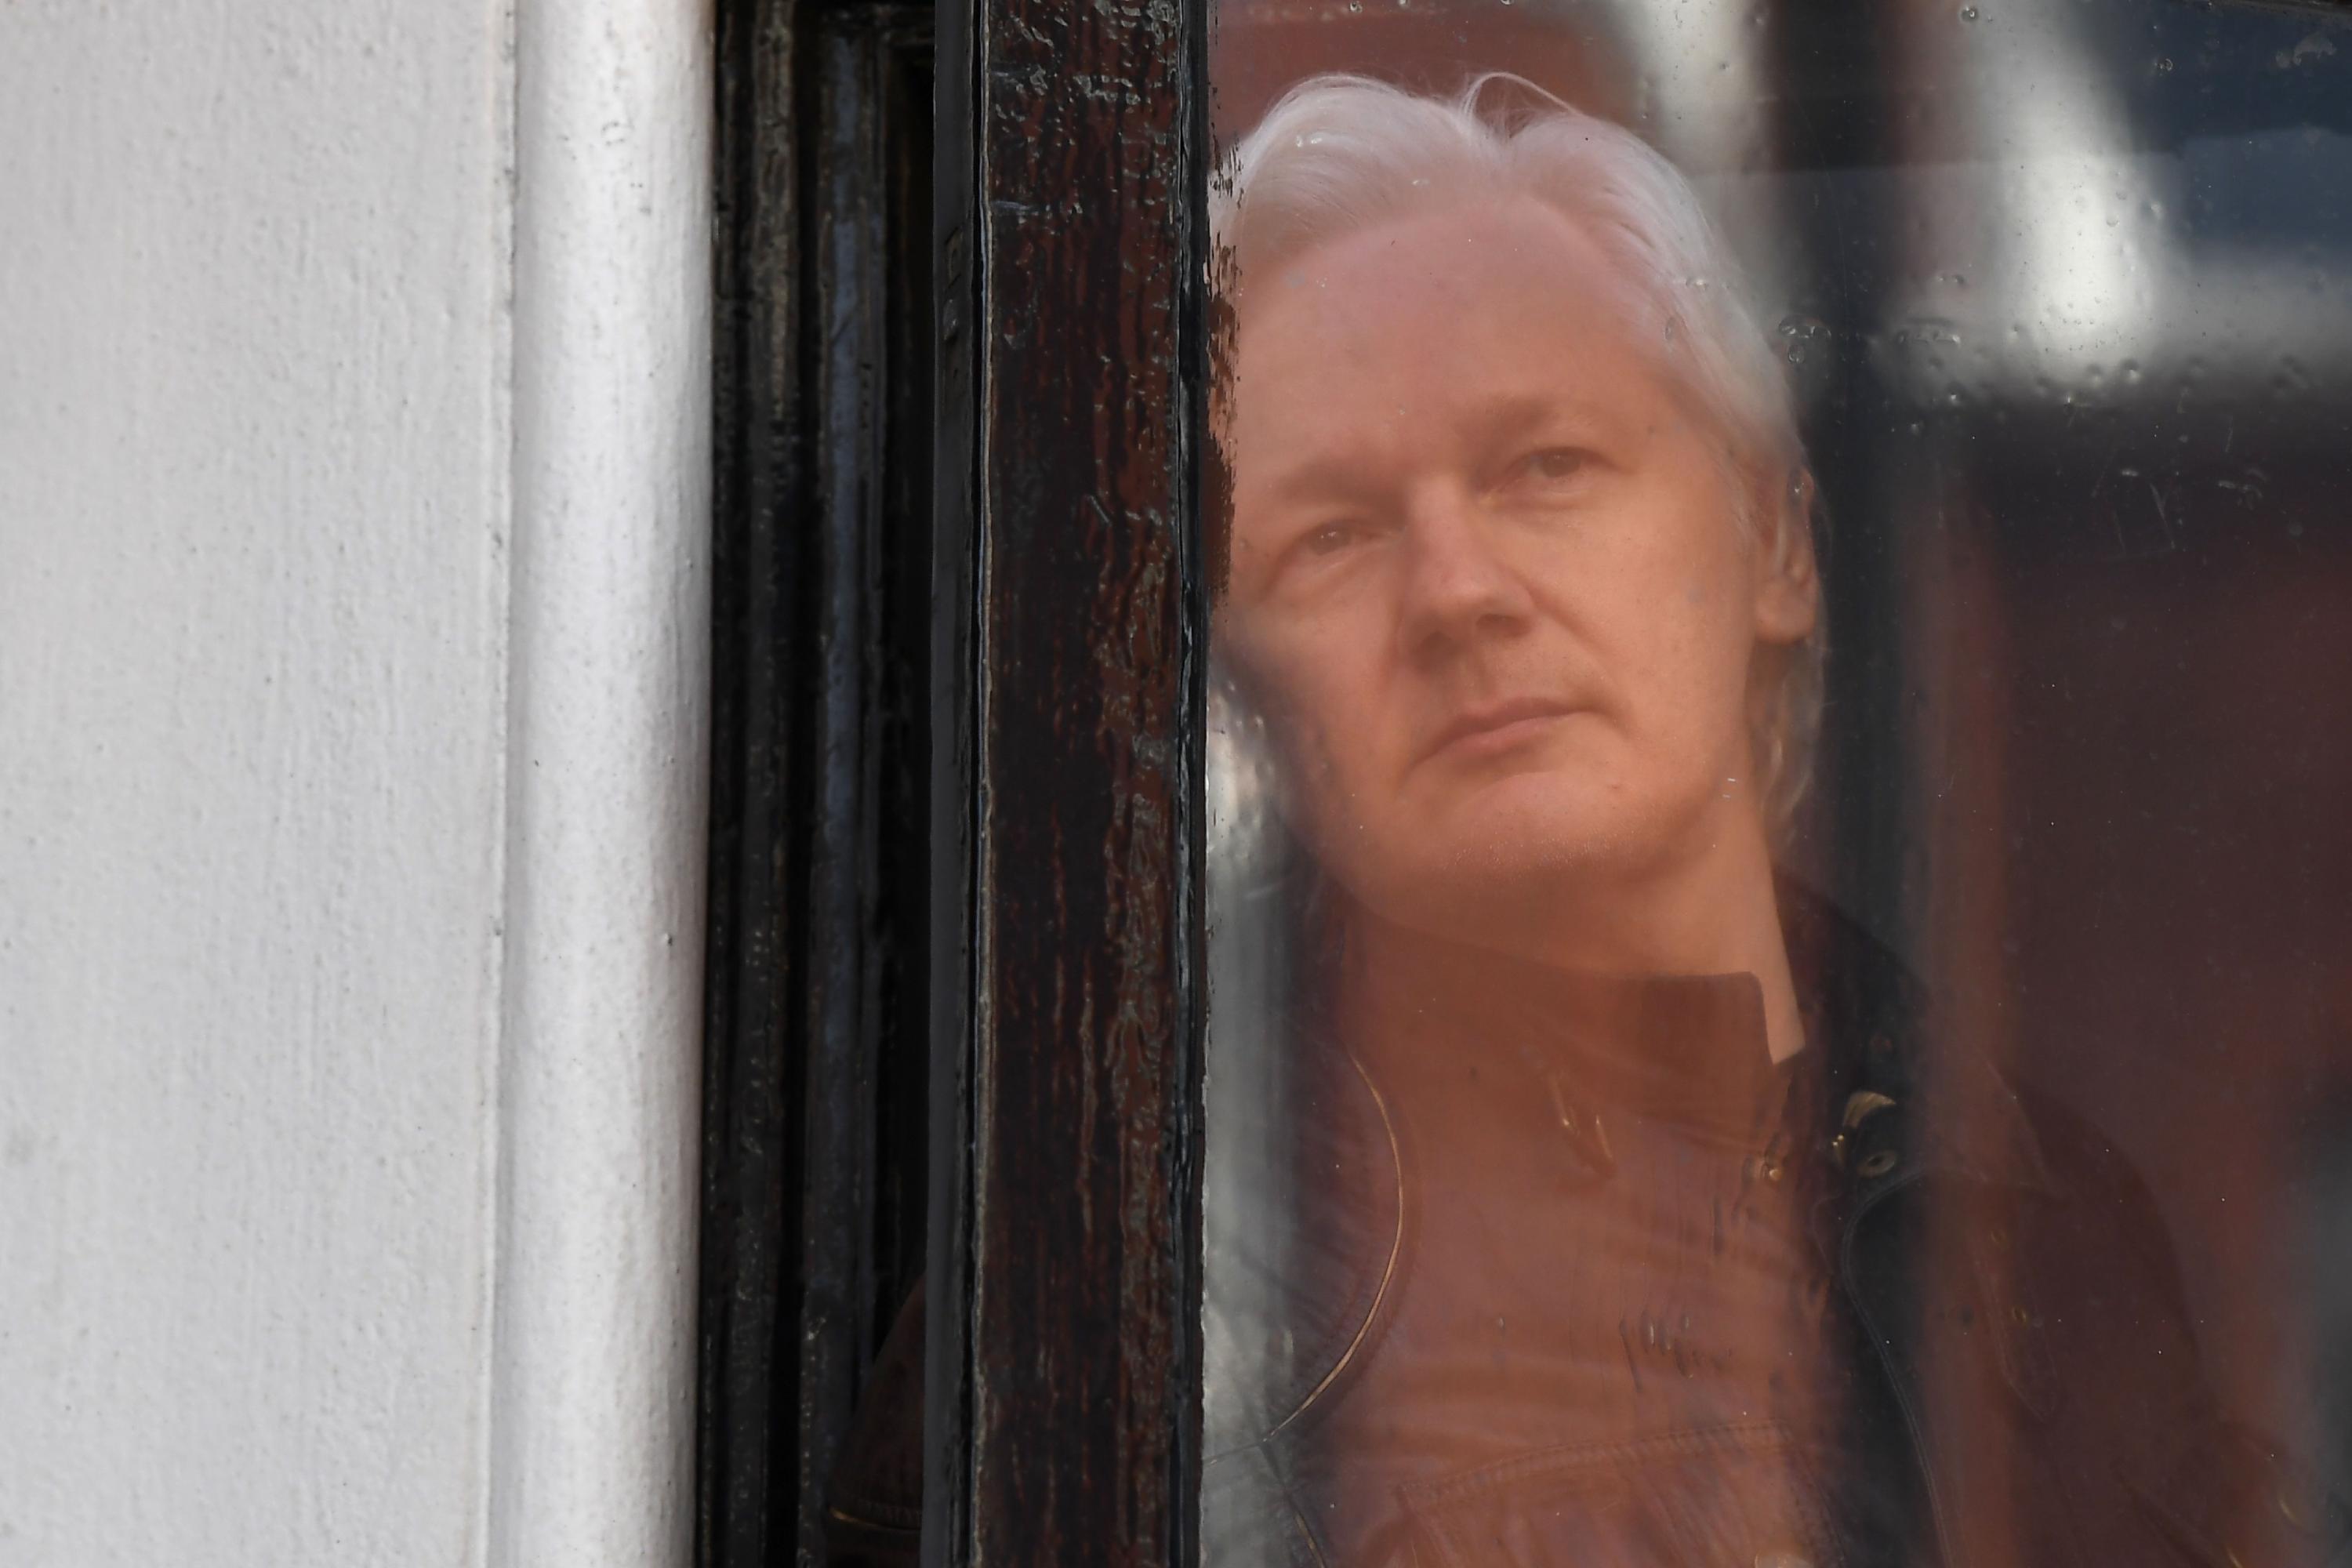 (FILES) In this file photo taken on May 19, 2017 Wikileaks founder Julian Assange look out from a window at the Embassy of Ecuador in London. - British police have arrested WikiLeaks founder Julian Assange at Ecuador